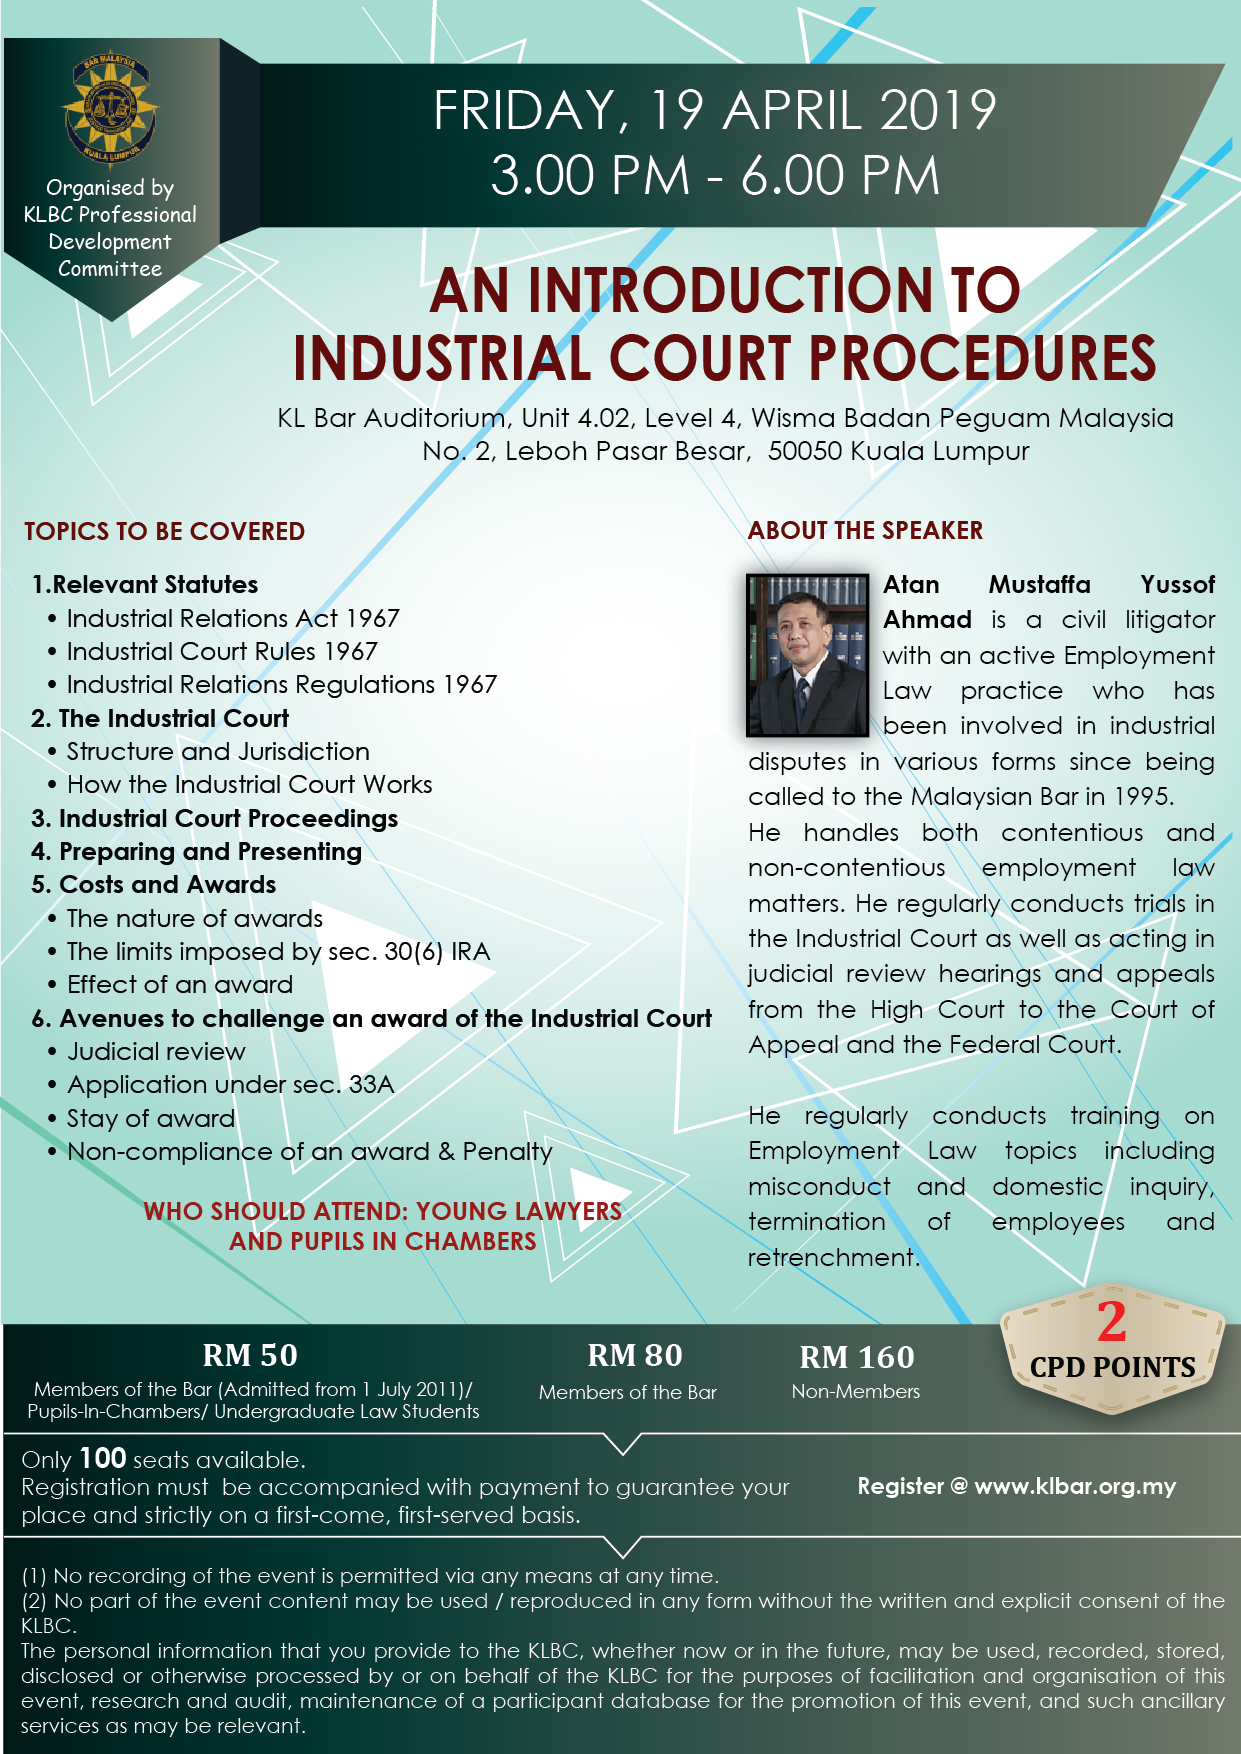 Pdc Seminar On An Introduction To Industrial Court Procedures On 19 April 2019 Kl Bar